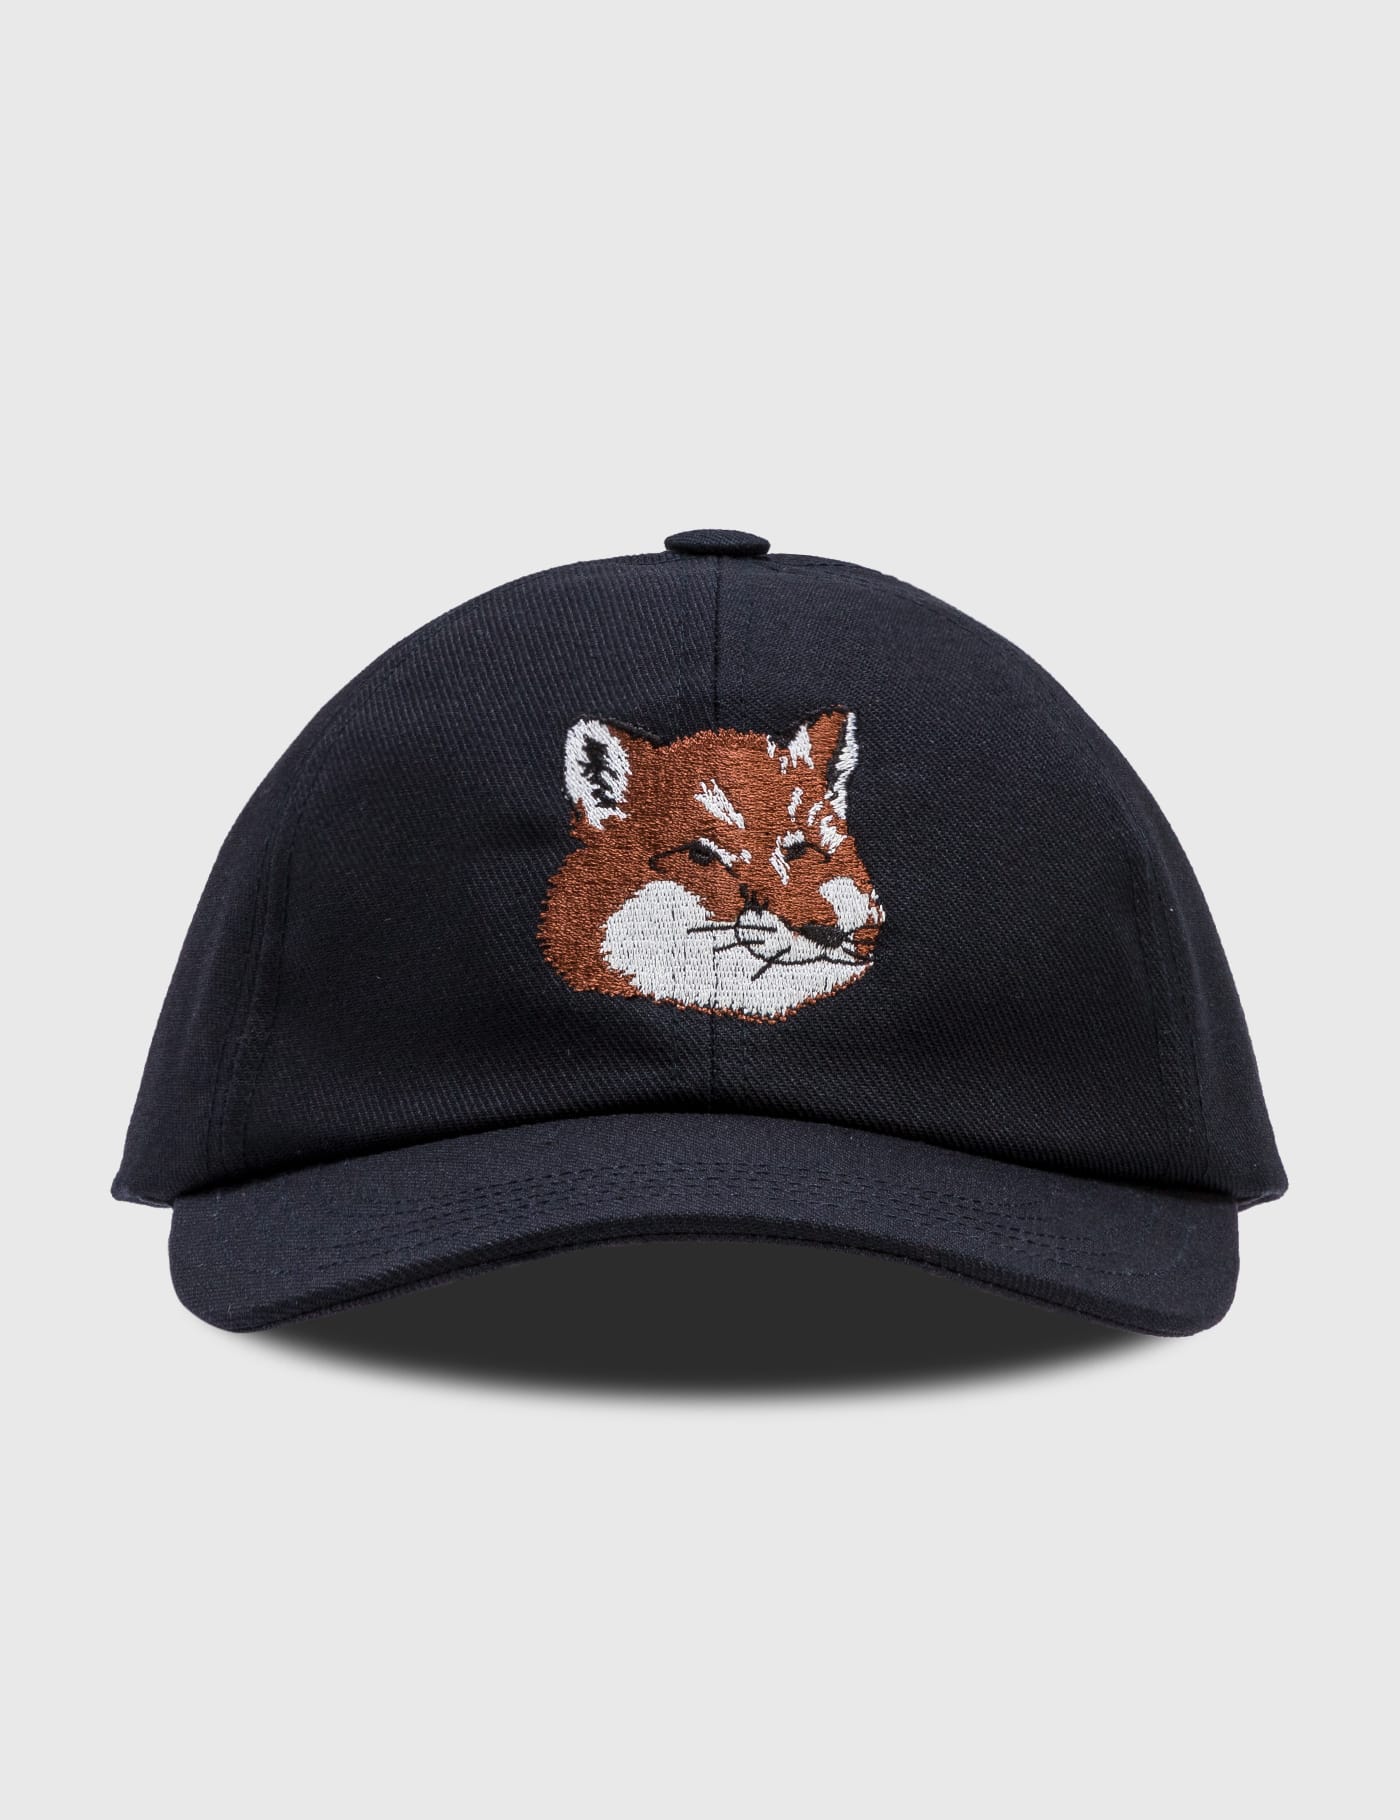 Maison Kitsune - Large Fox Head Embroidery Cap | HBX - Globally Curated  Fashion and Lifestyle by Hypebeast